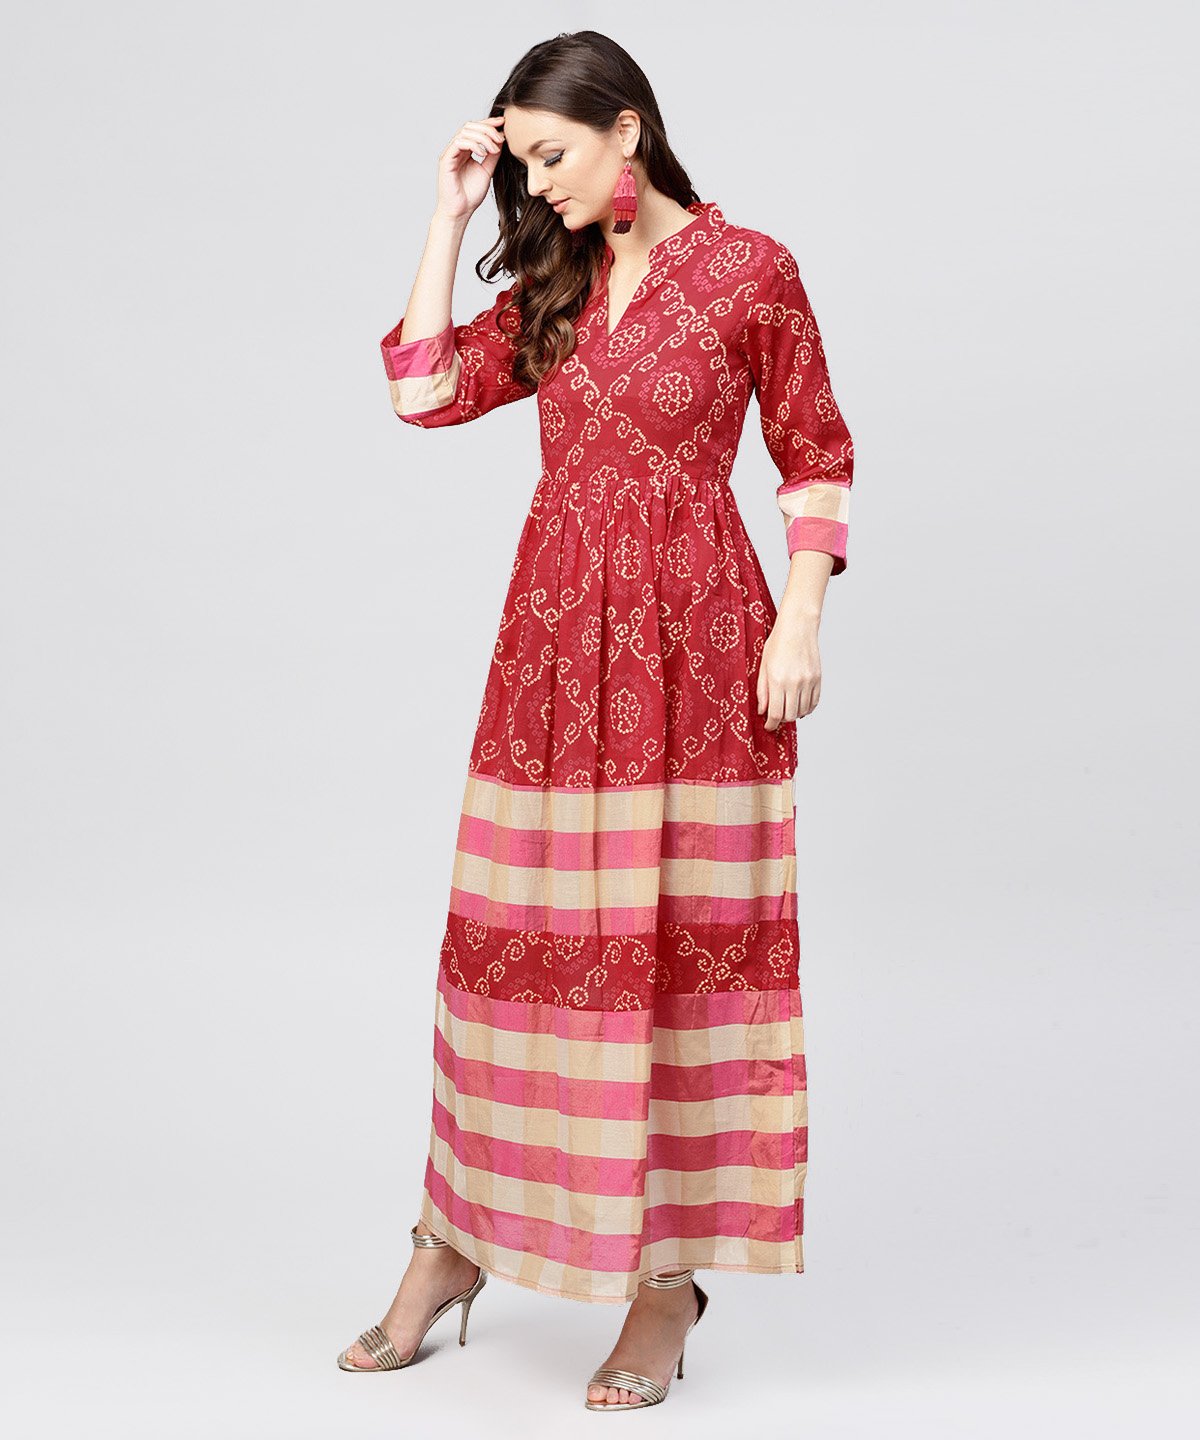 Women's Red Printed Dress With Mandarin Collar And 3/4 Sleeves - Nayo Clothing